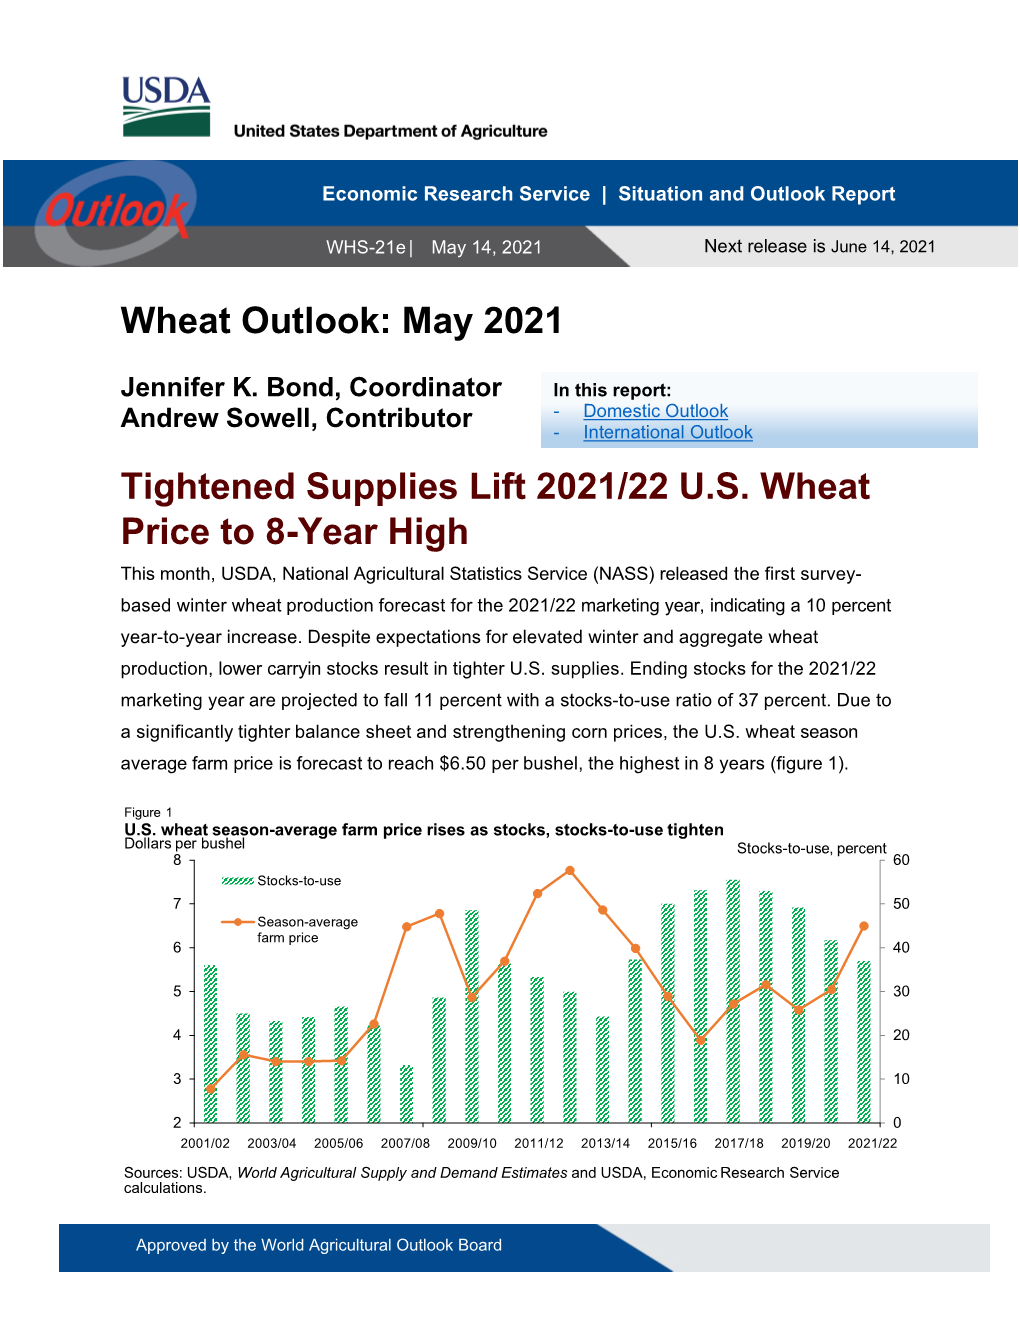 Wheat Outlook: May 2021